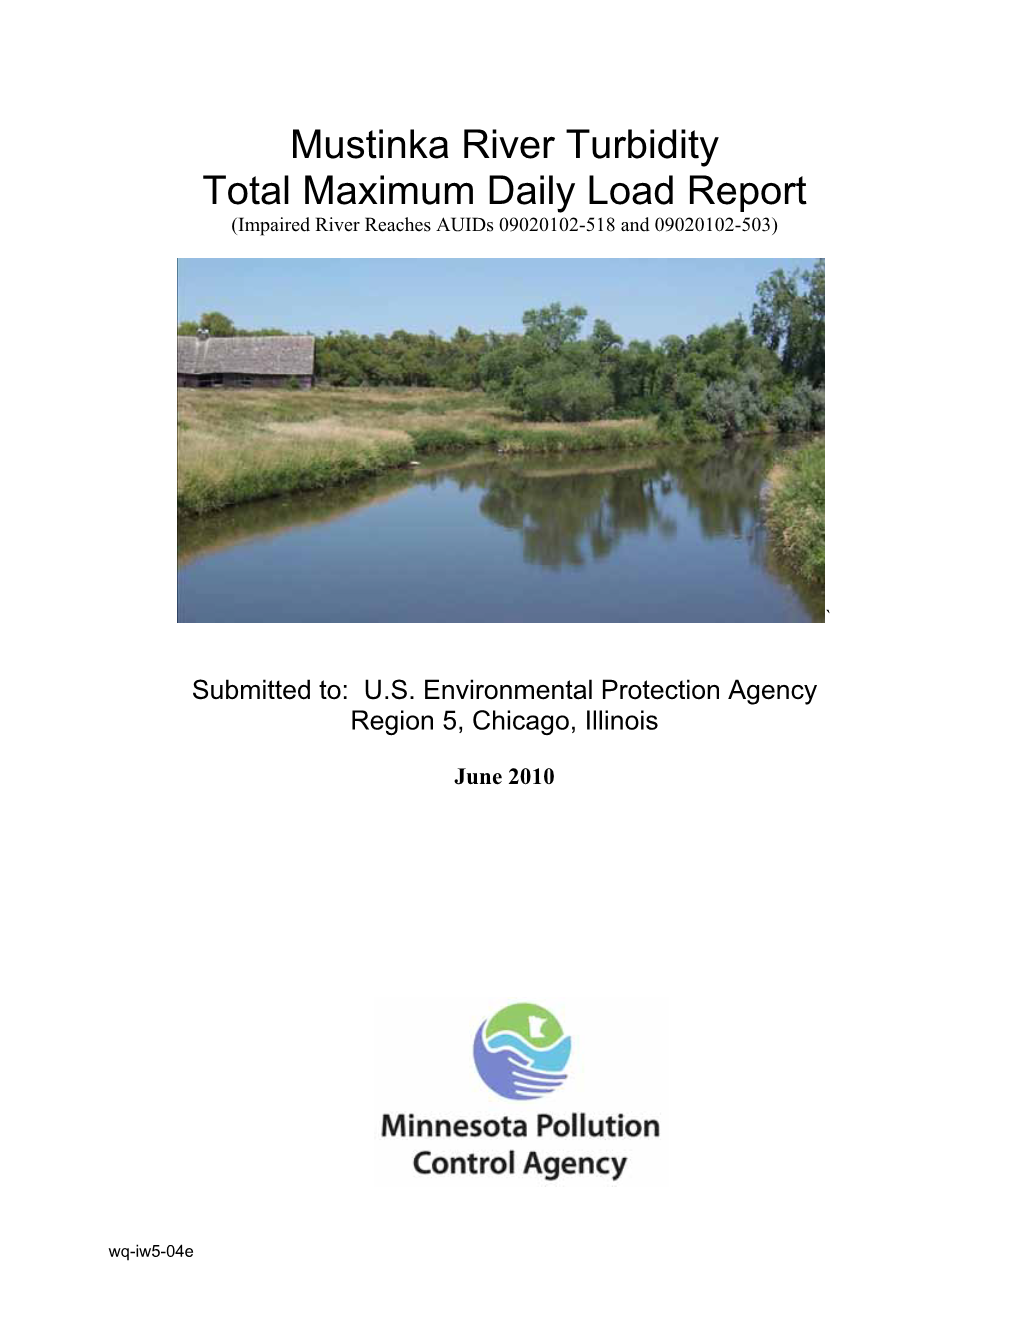 Mustinka River Turbidity Total Maximum Daily Load Report (Impaired River Reaches Auids 09020102-518 and 09020102-503)